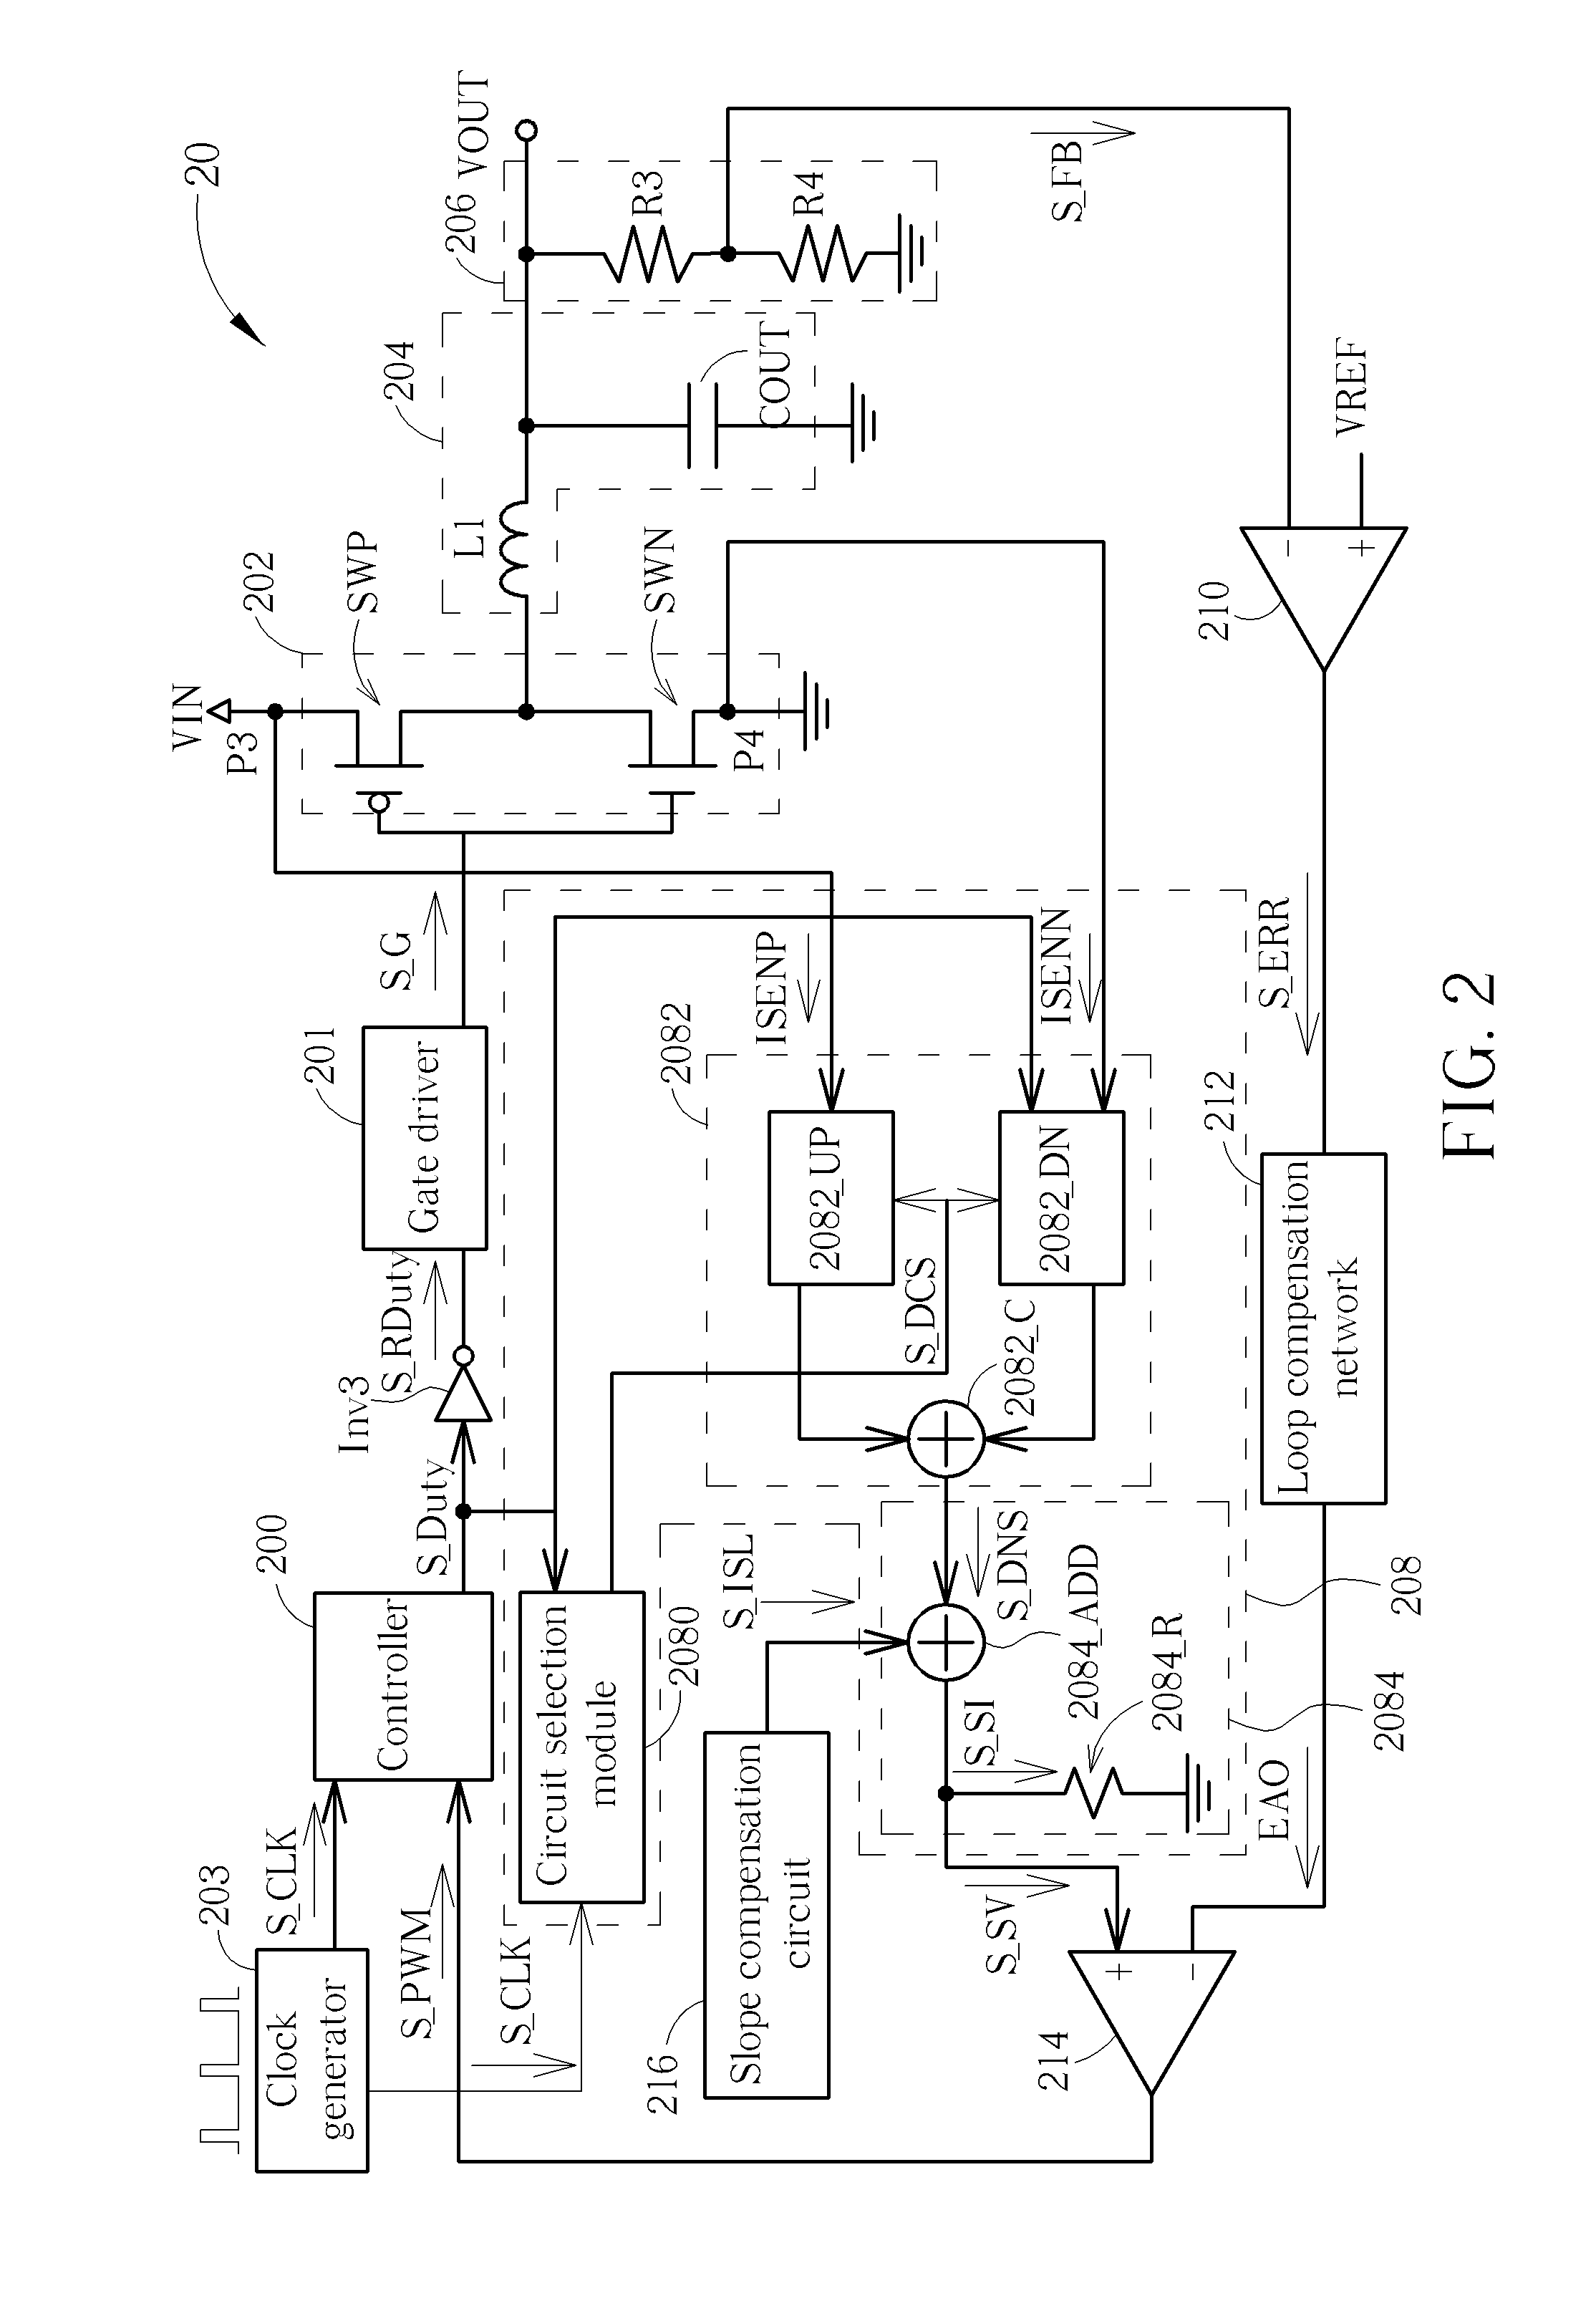 Method and Apparatus for All Duty Current Sensing in Current Mode Converter